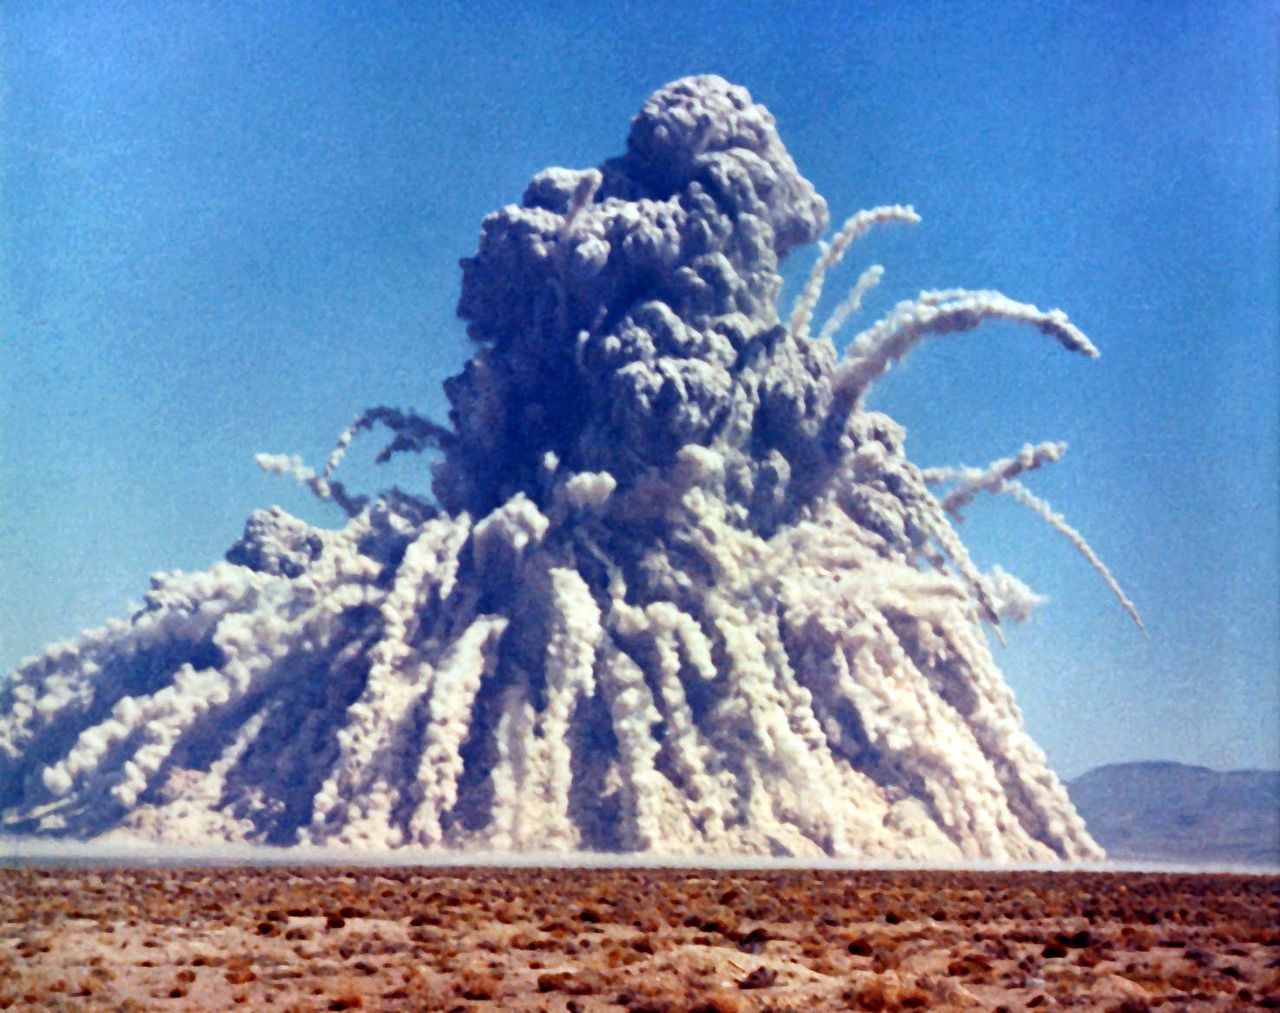 One of the test explosions carried out as part of Operation Plowshare